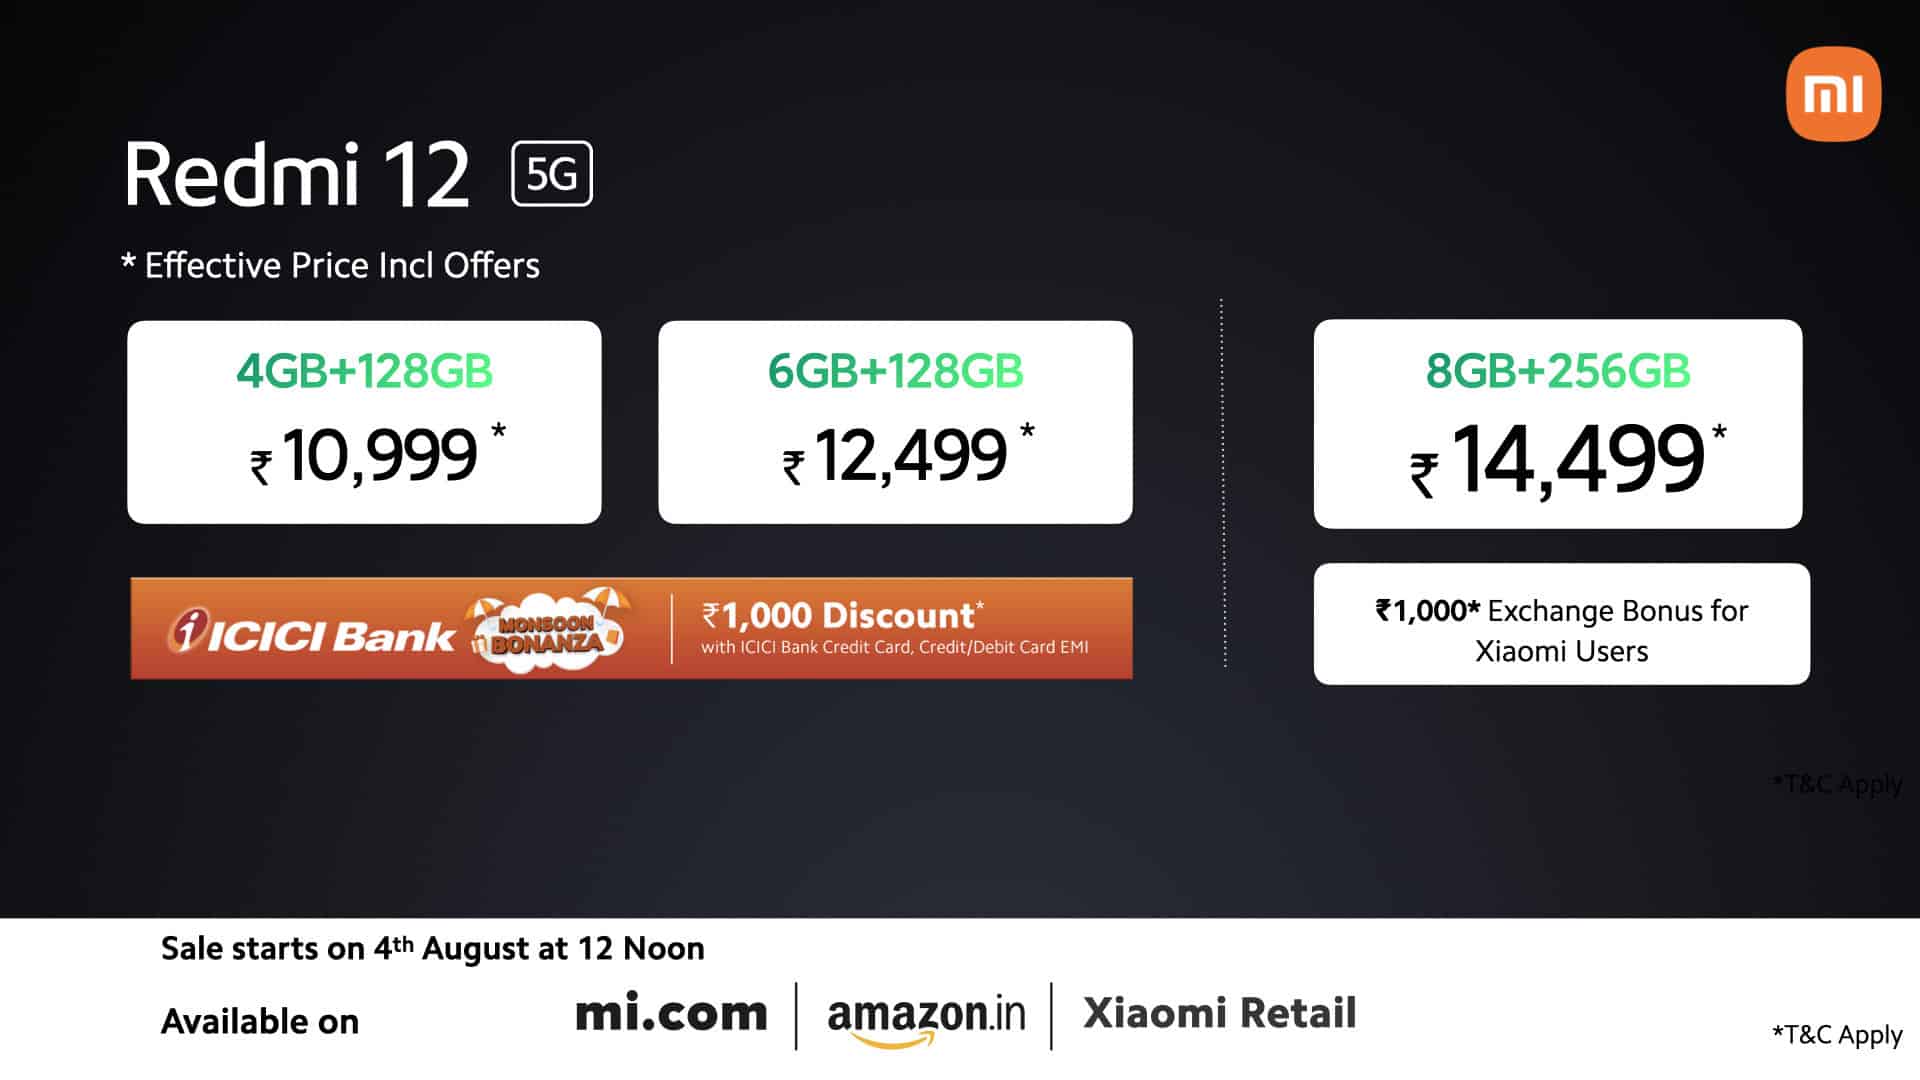 Redmi 12 5G and 4G: Price and Availability